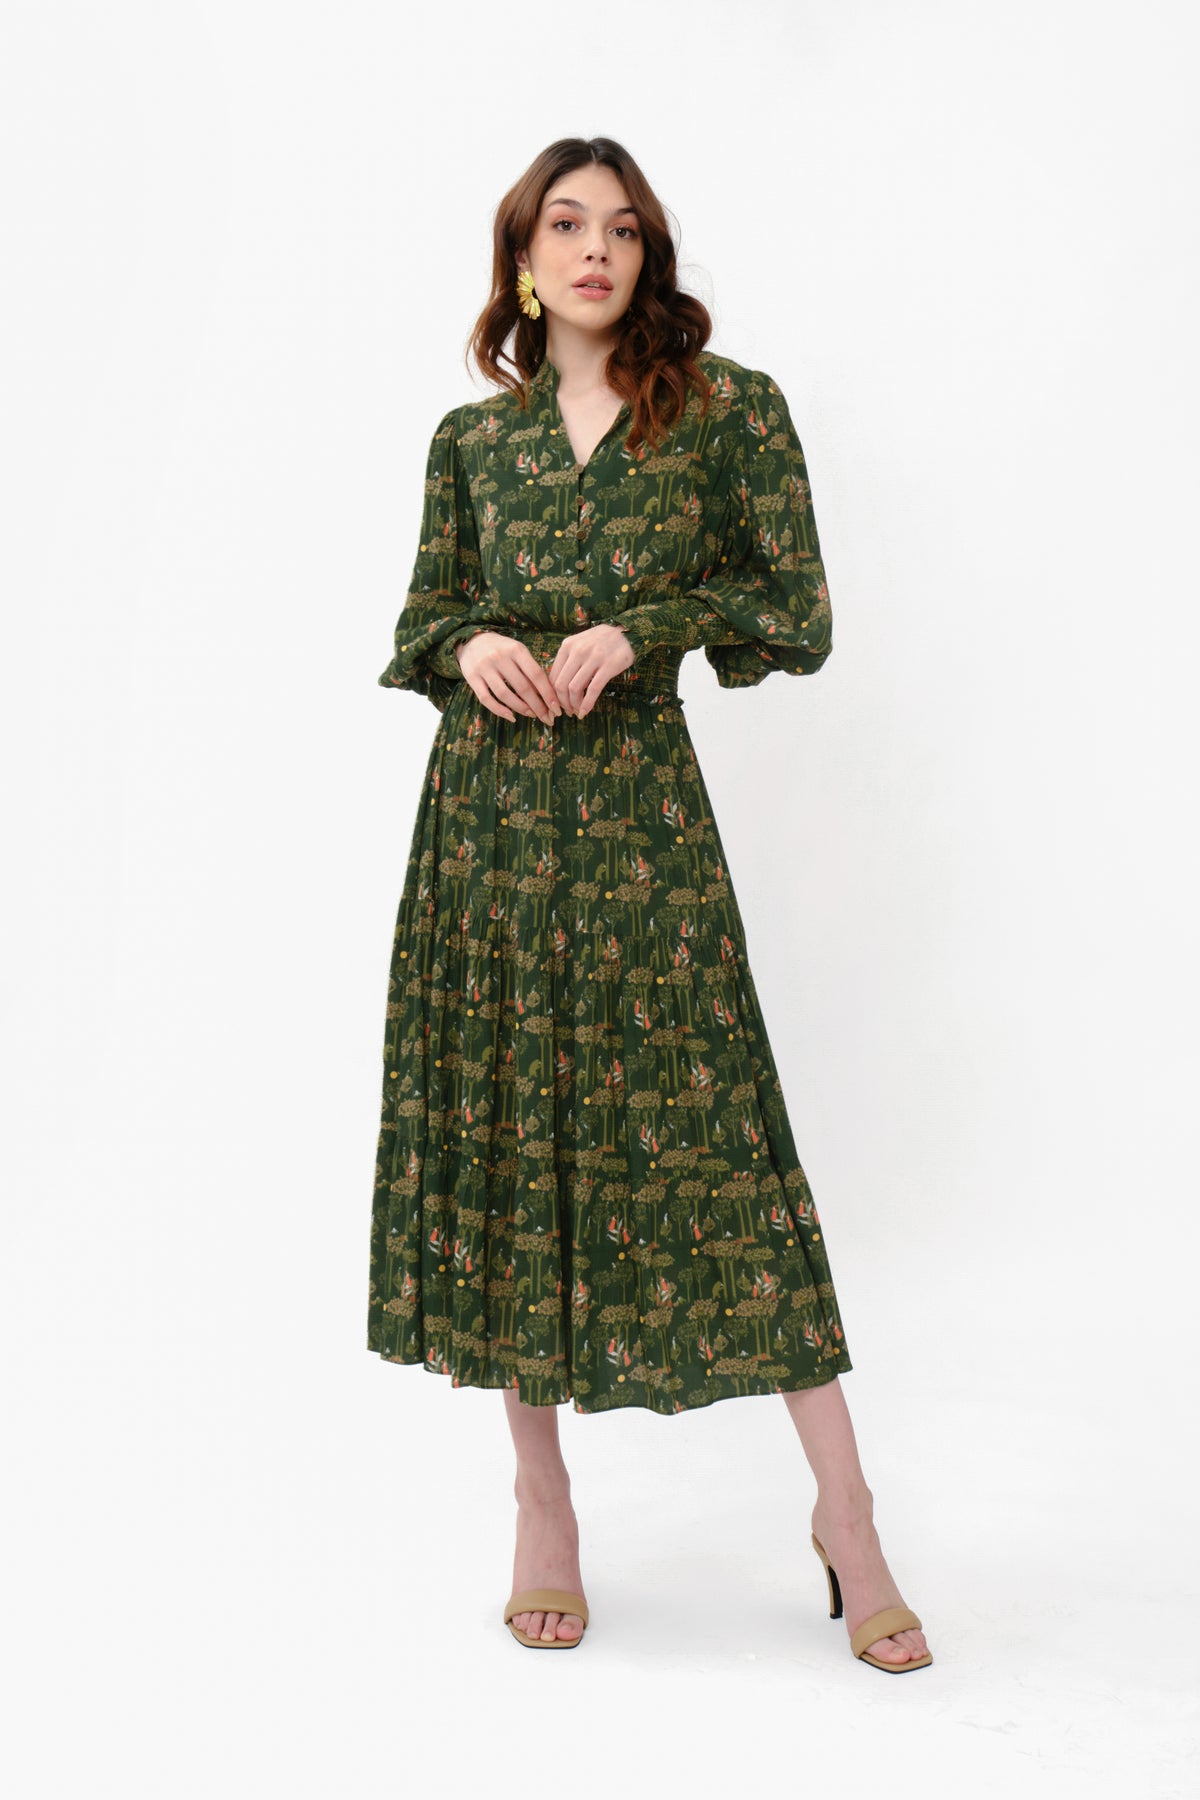 GINA Dress in Green Forest